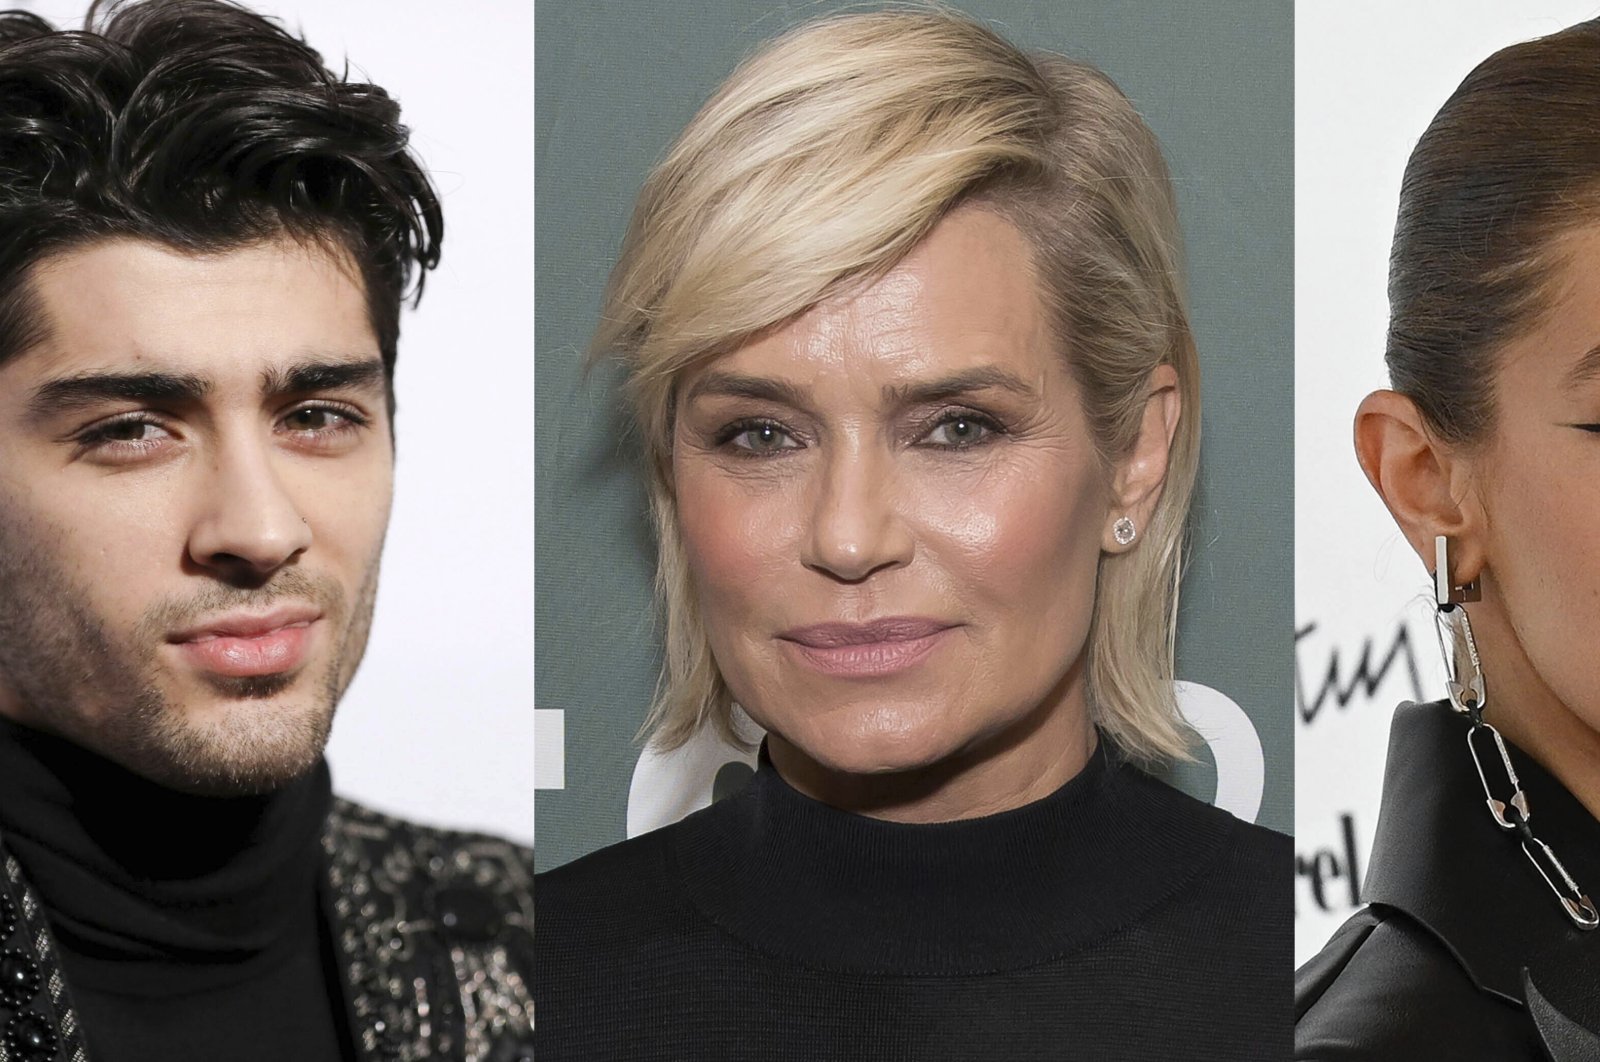 The photo combination shows singer Zayn Malik (L) at the Clive Davis and The Recording Academy Pre-Grammy Gala in Beverly Hills, California, U.S., Feb. 11, 2017; model Yolanda Hadid at a book signing for her memoir "Believe Me" in New York on Sept. 13, 2017 (C) and model Gigi Hadid at the Daily Front Row Fashion Media Awards in New York, U.S., Sept. 9, 2021.  (AP Photo)